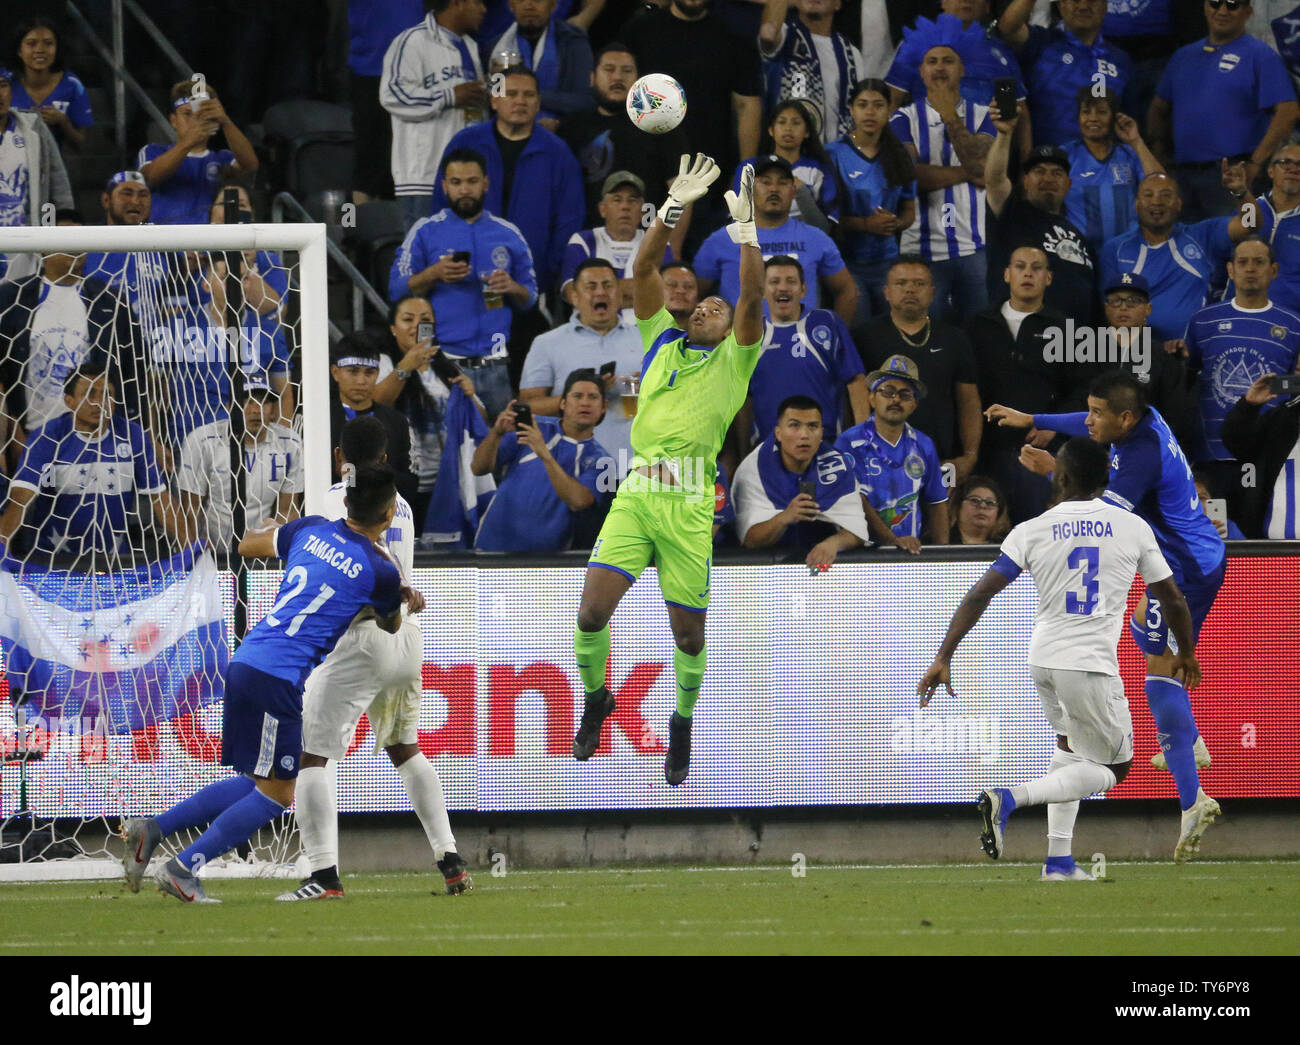 Los Angeles, California, USA. 25th June, 2019. Honduras goalkeeper Luis Lopez (1) makes a save during a CONCACAF Gold Cup soccer match between Honduras and El Salvador in Los Angeles, California, Tuesday, June 25, 2019. Honduras won 4-0. Credit: Ringo Chiu/ZUMA Wire/Alamy Live News Stock Photo